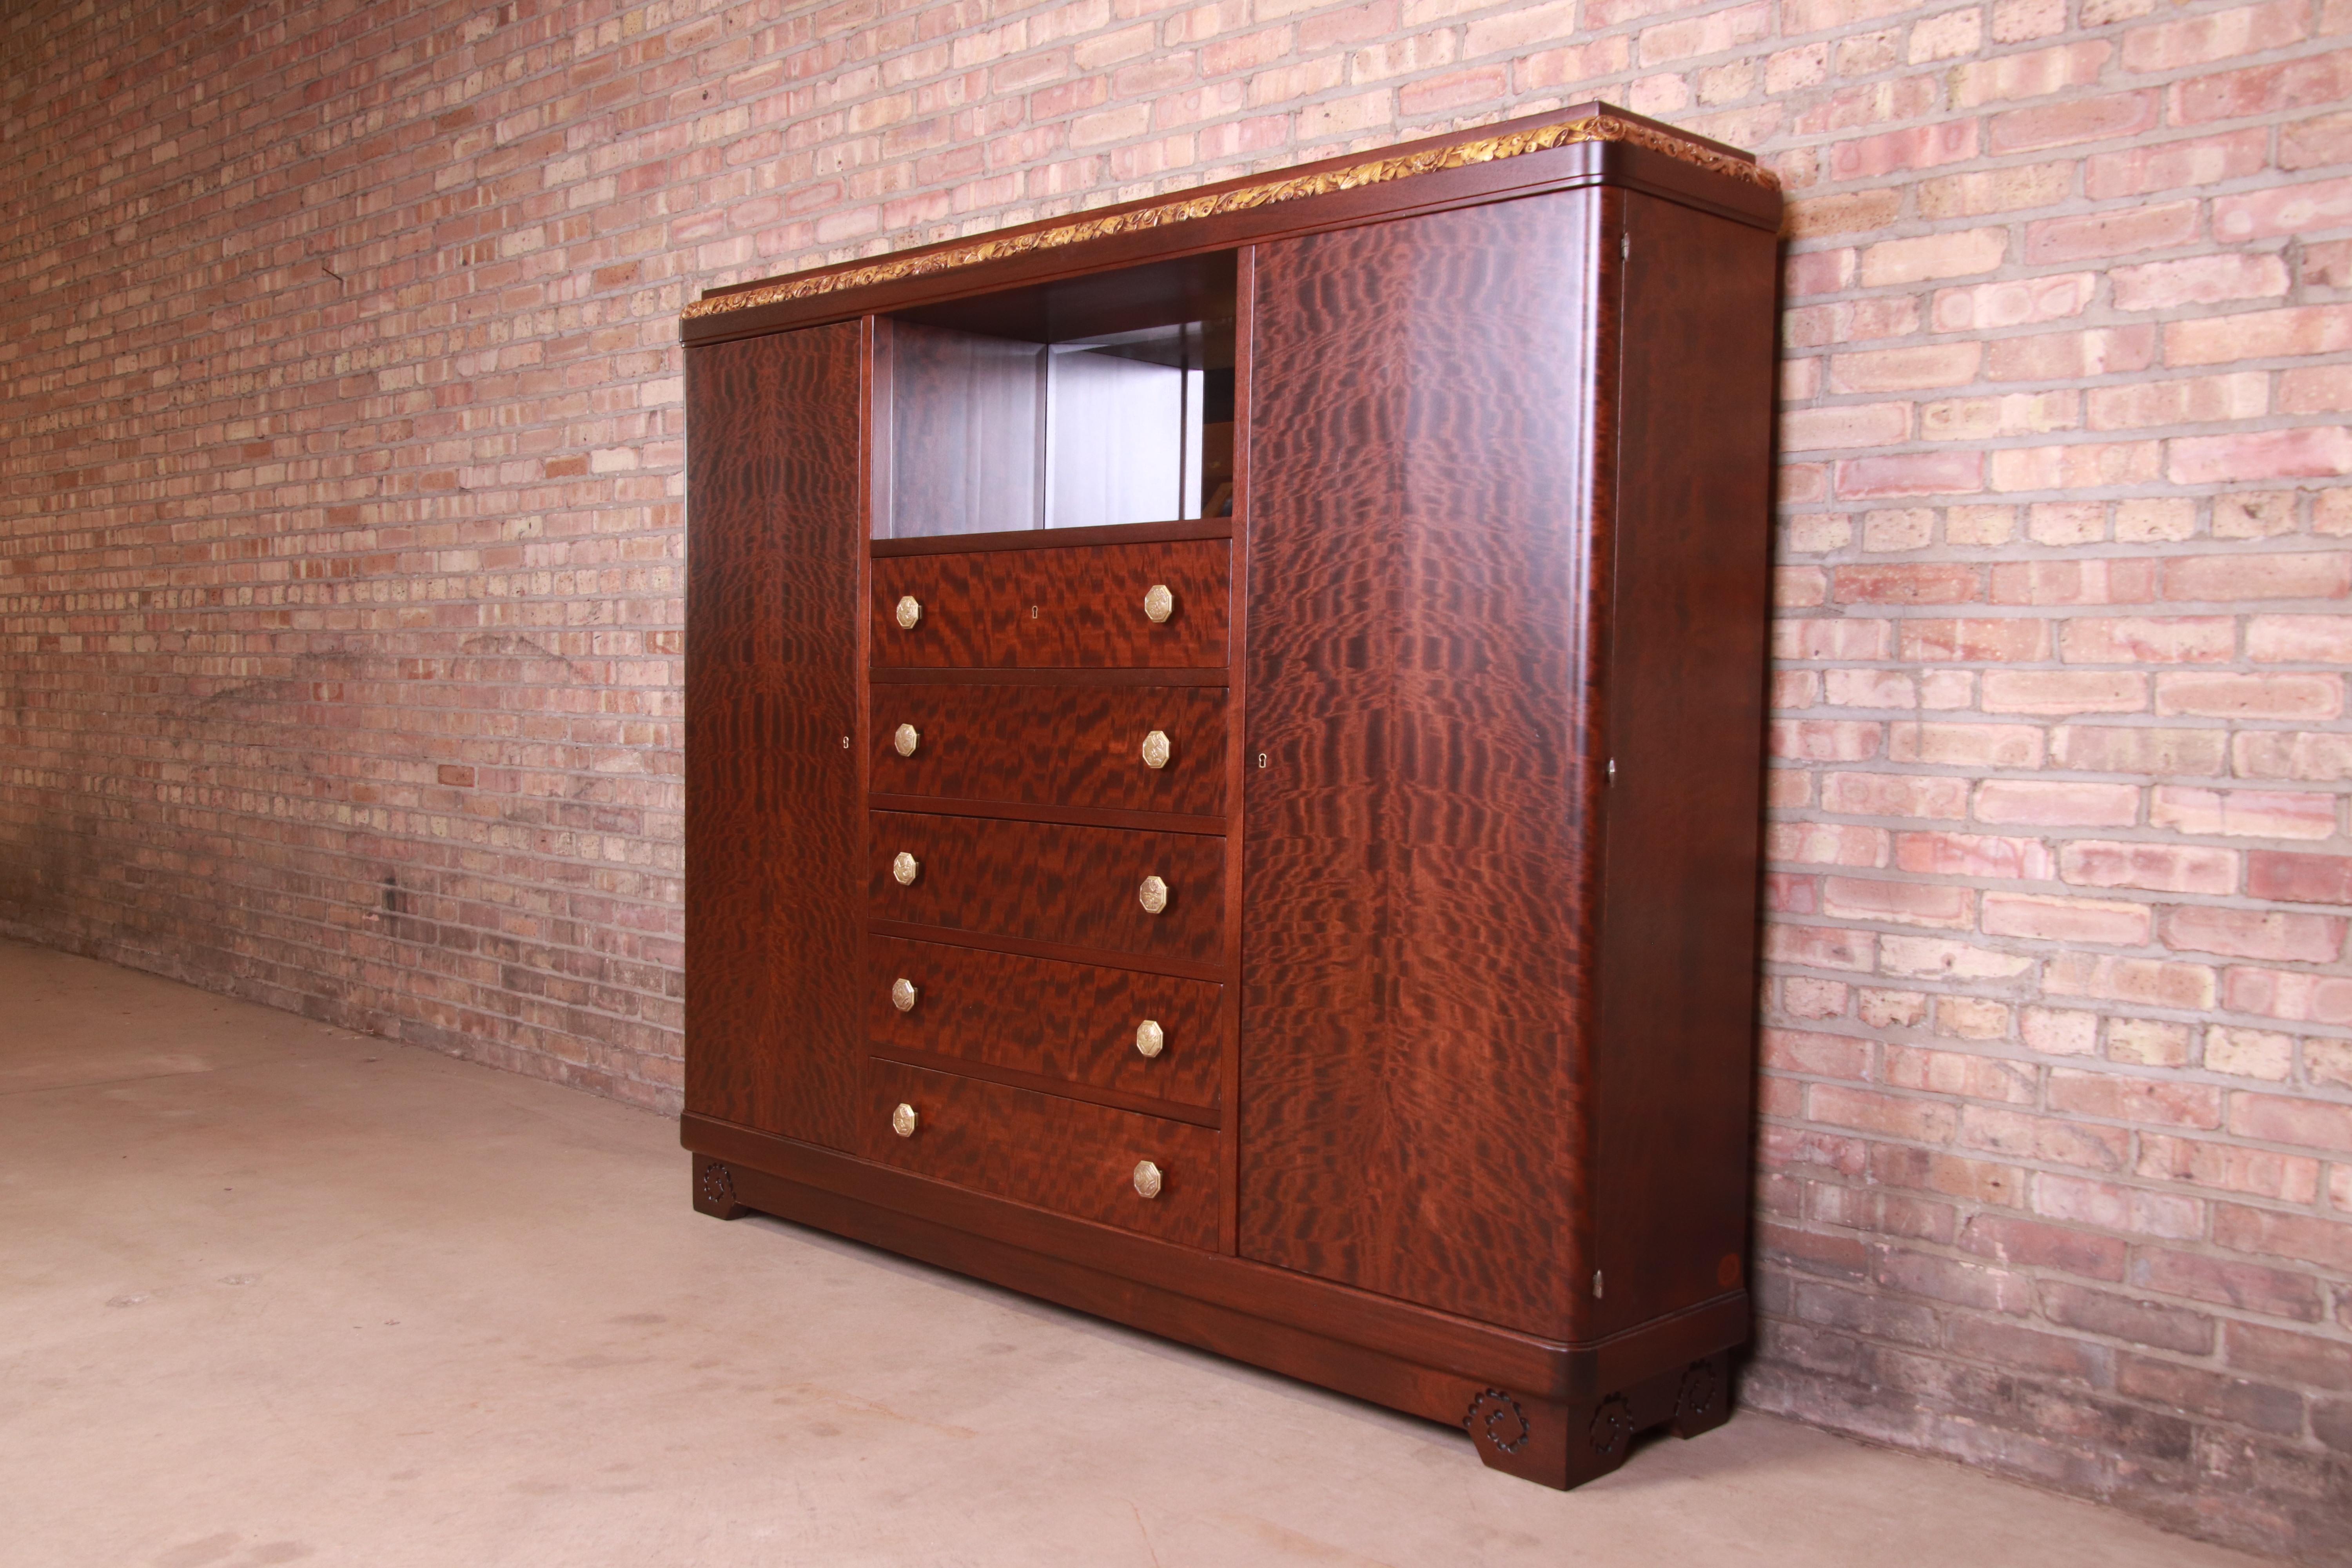 French Louis Majorelle Signed Art Nouveau Burled Mahogany Bar Cabinet, Newly Restored For Sale